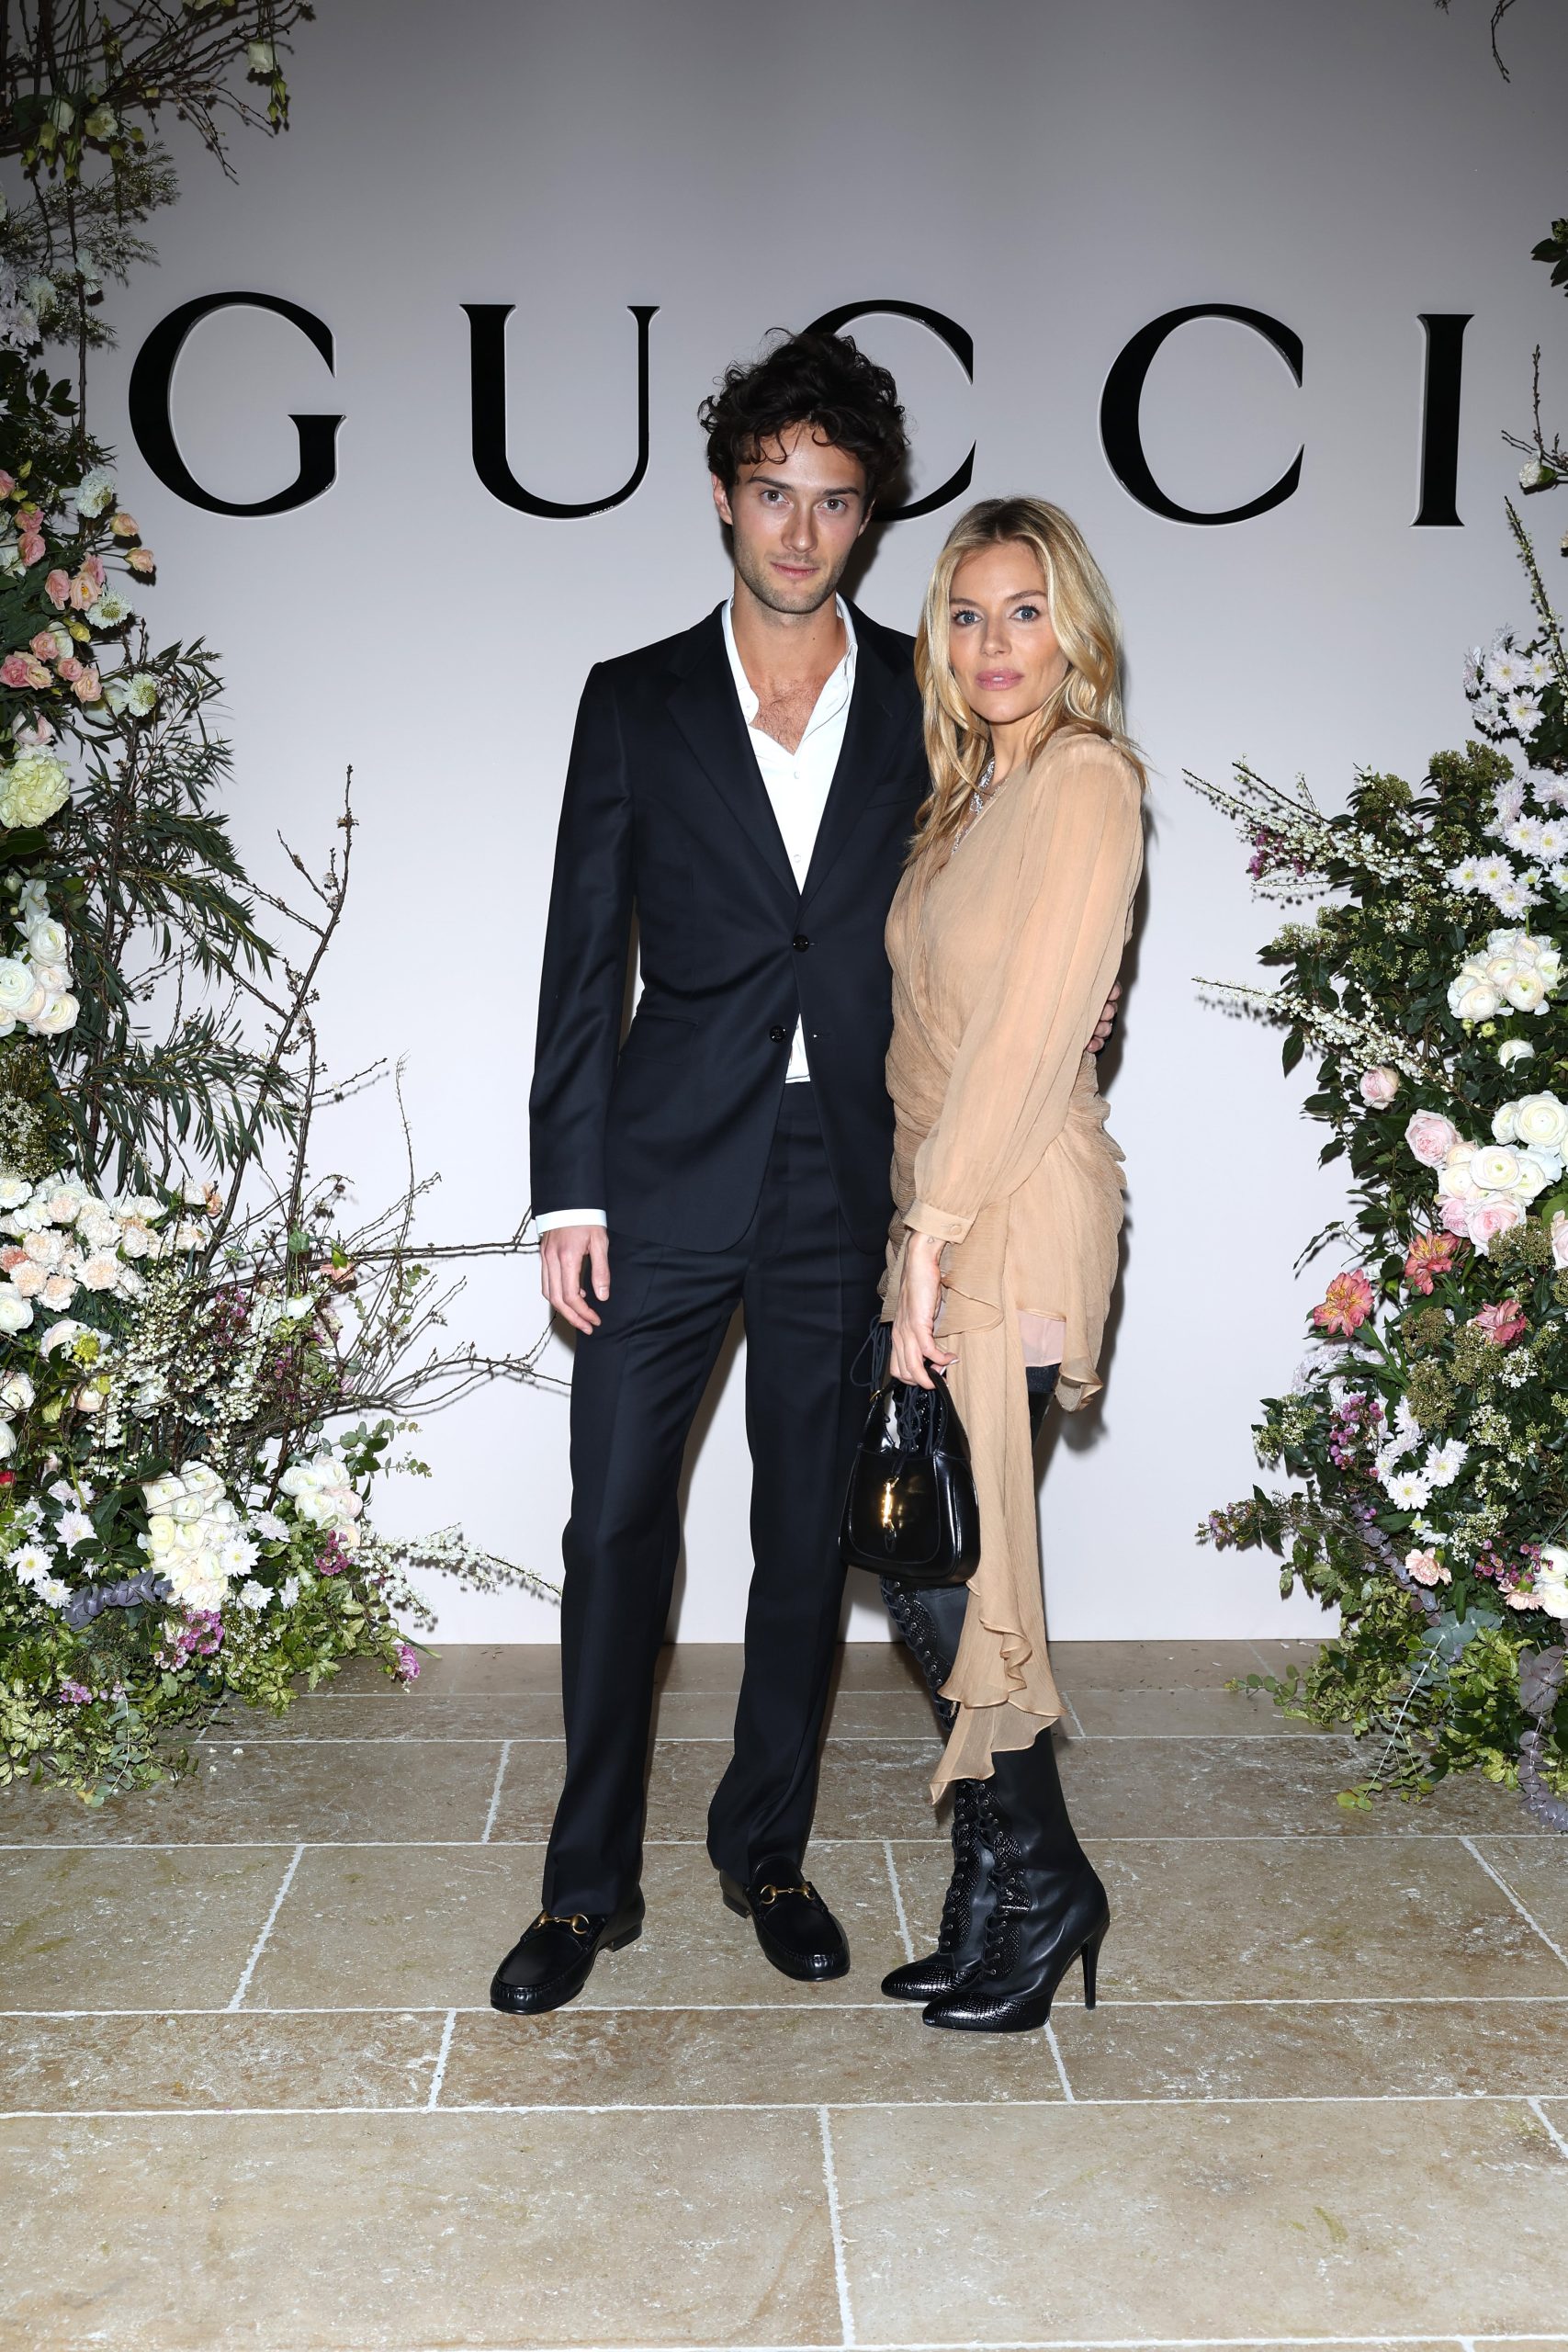 Gucci Dresses Sienna Miller, Diane Kruger, Carla Bruni, And Others To A ...